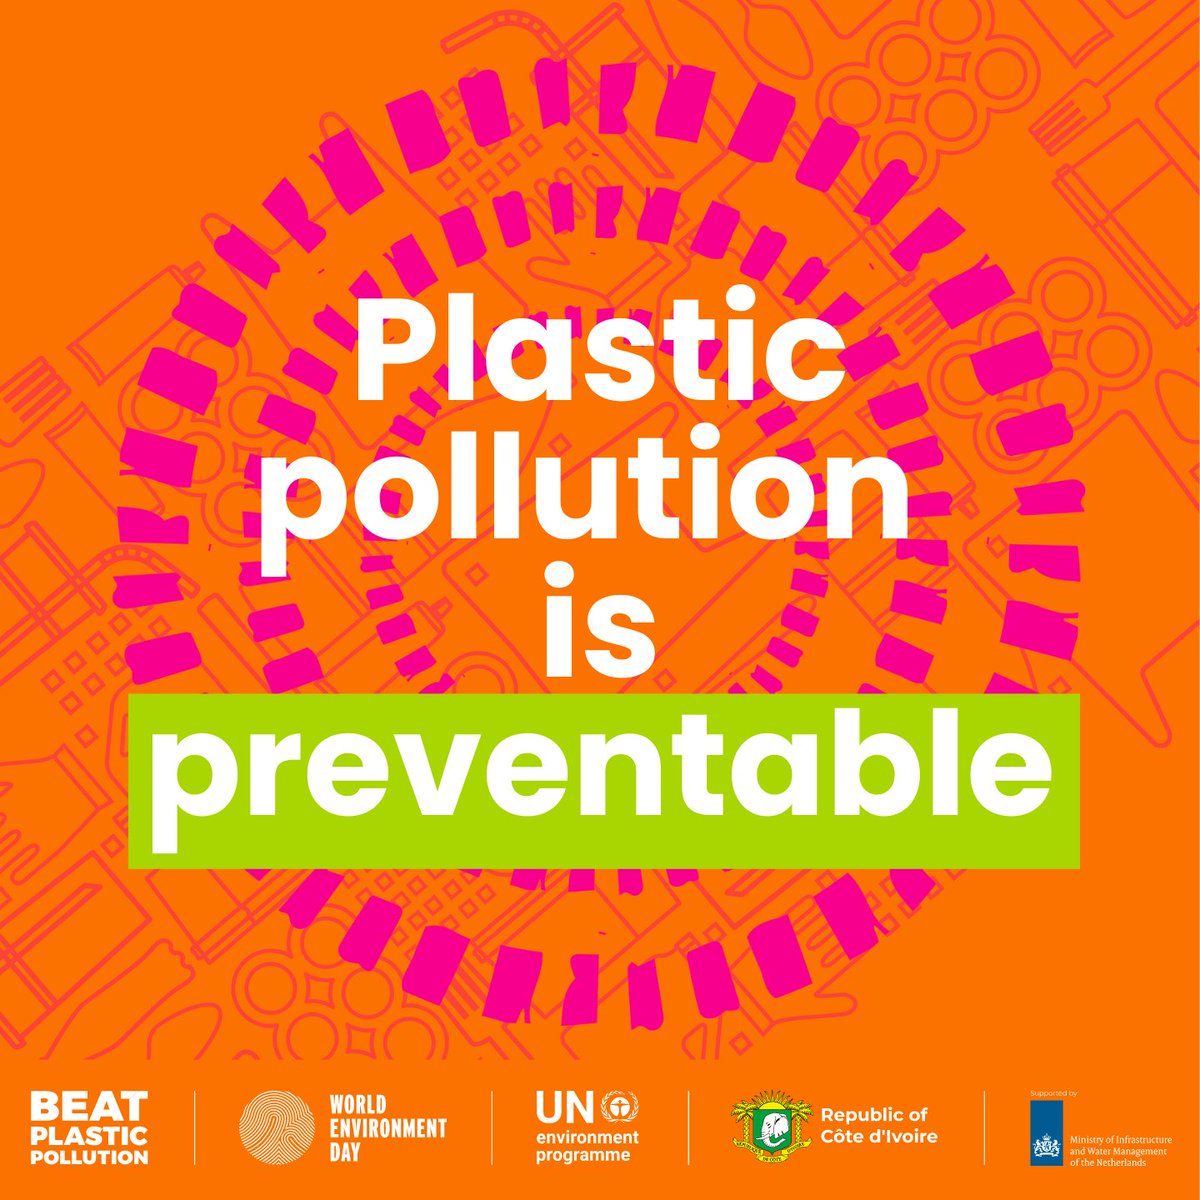 The best way to tackle plastic pollution is to prevent it in the first place! On #WorldEnvironmentDay, join @UNEP in calling for accelerated progress to #BeatPlasticPollution.